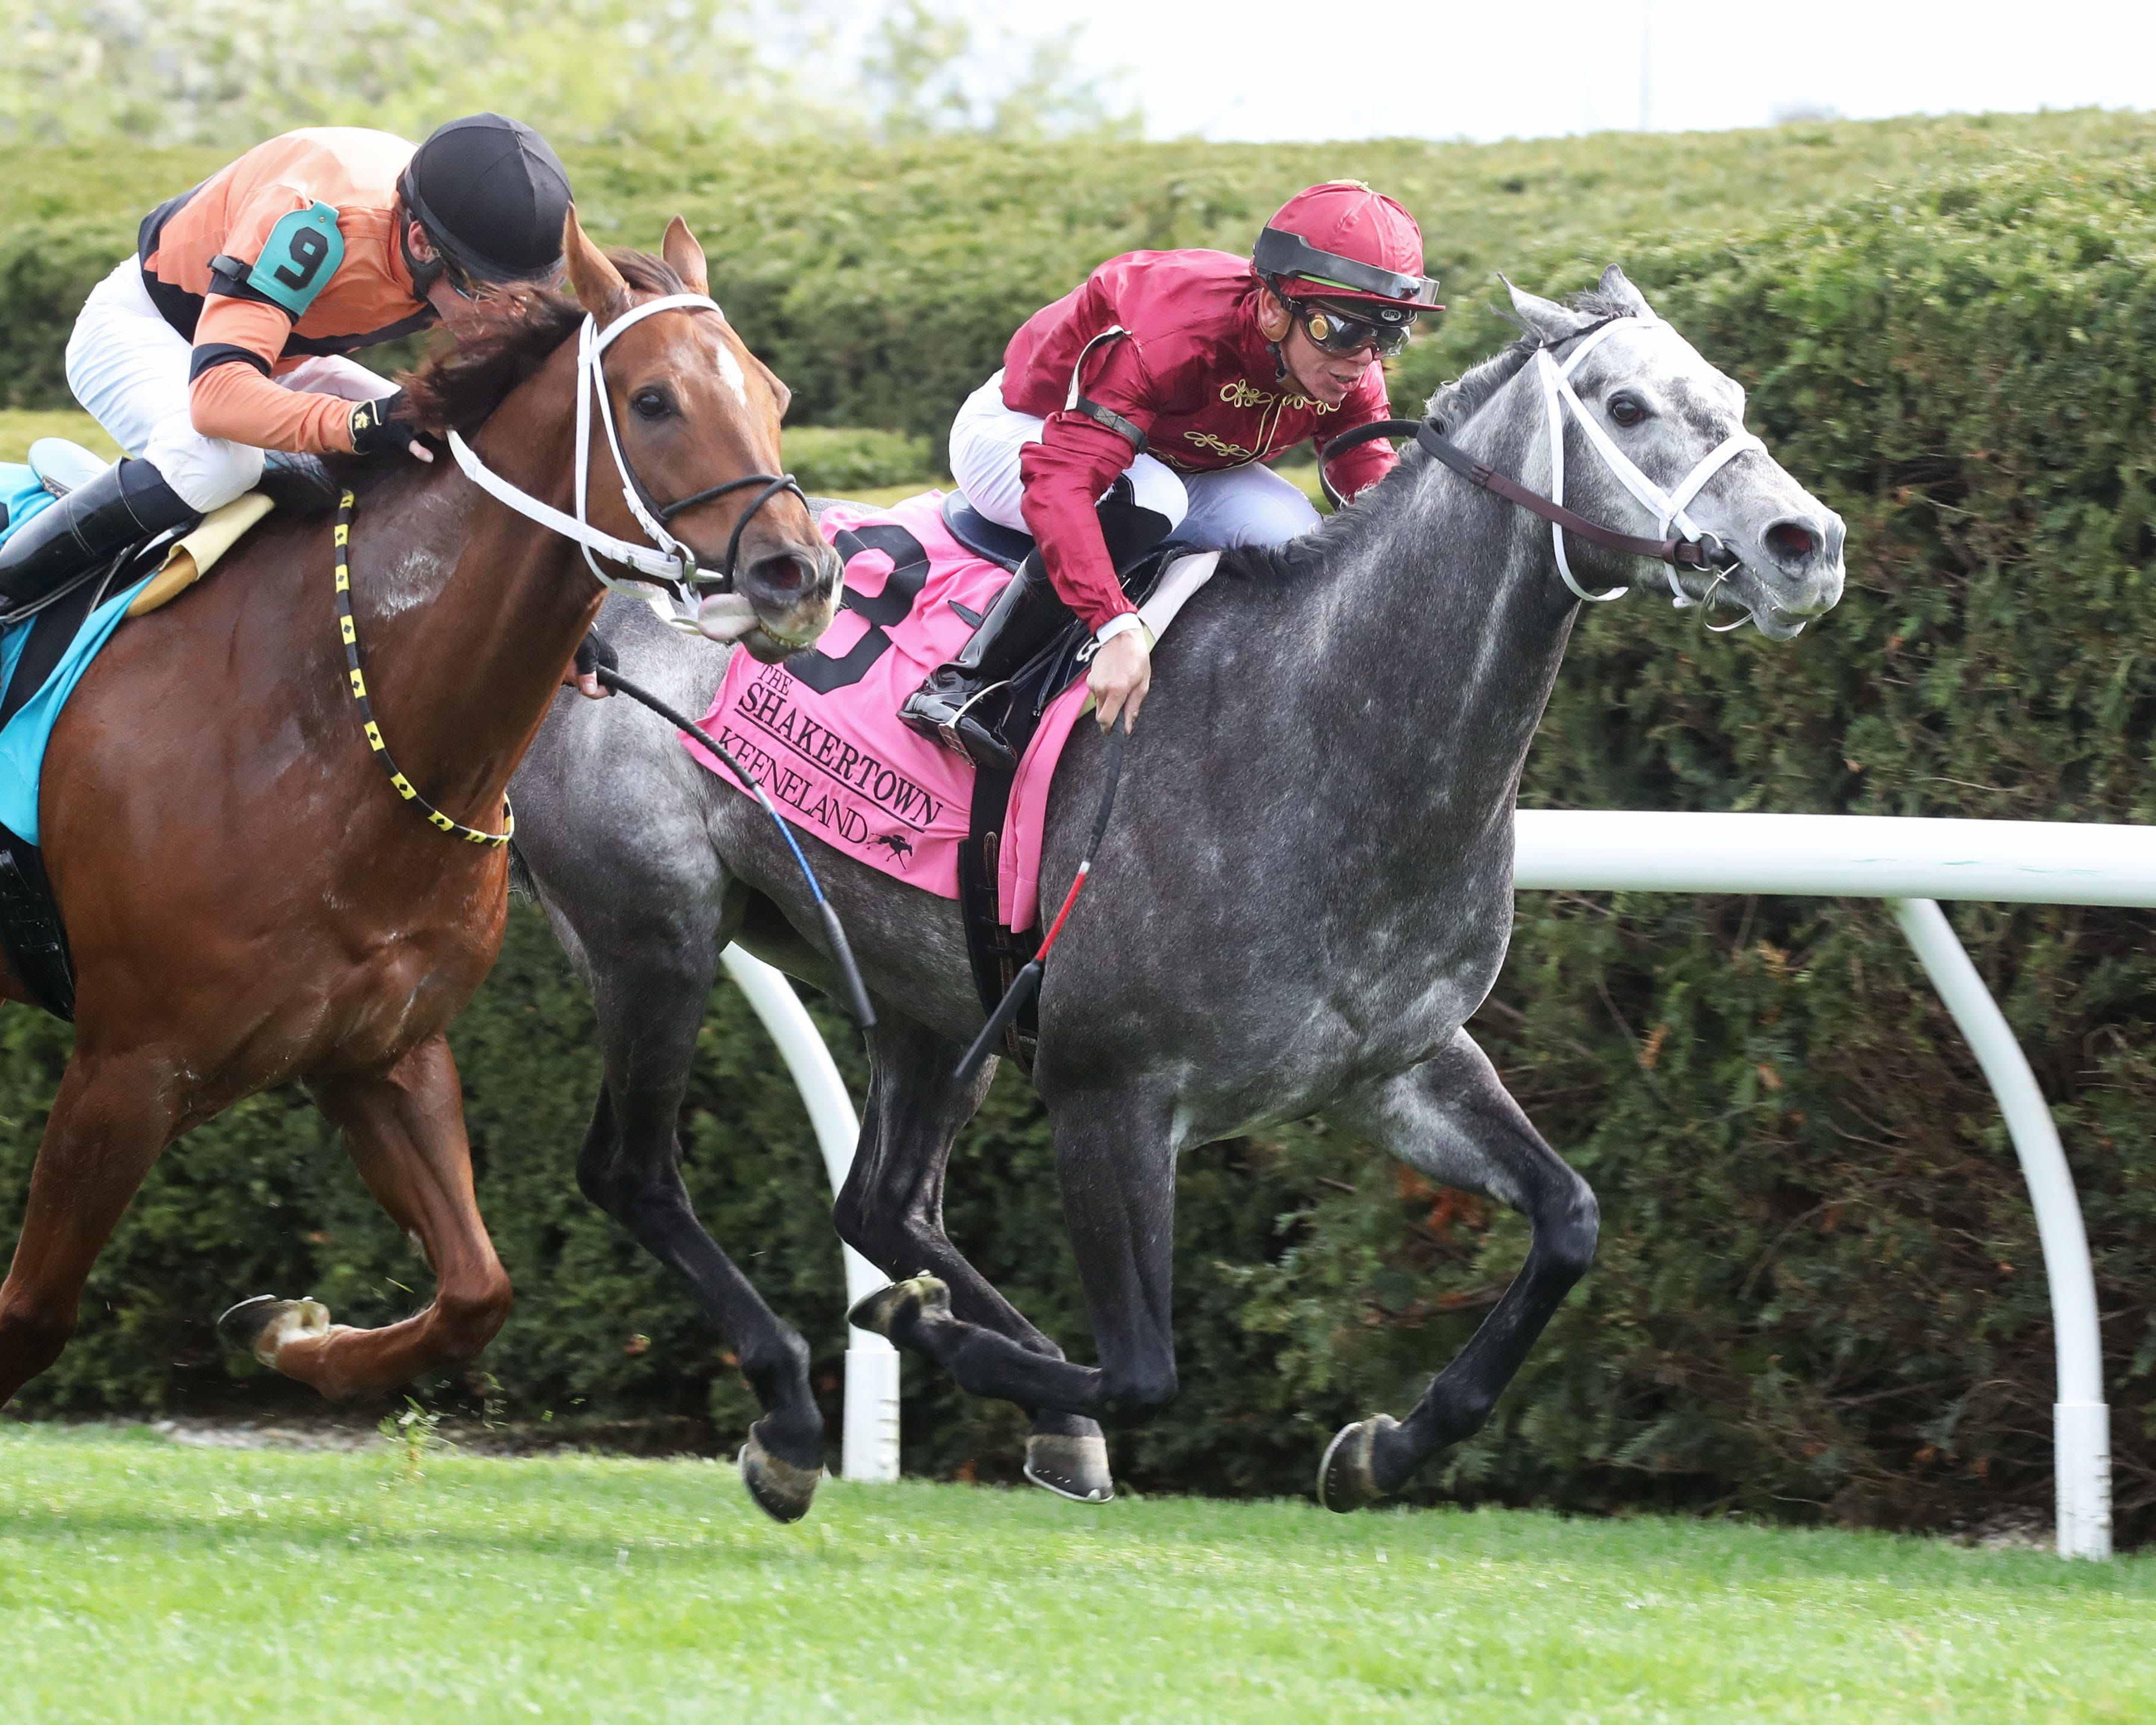 Caravel shows she's still the queen of Keeneland with victory in